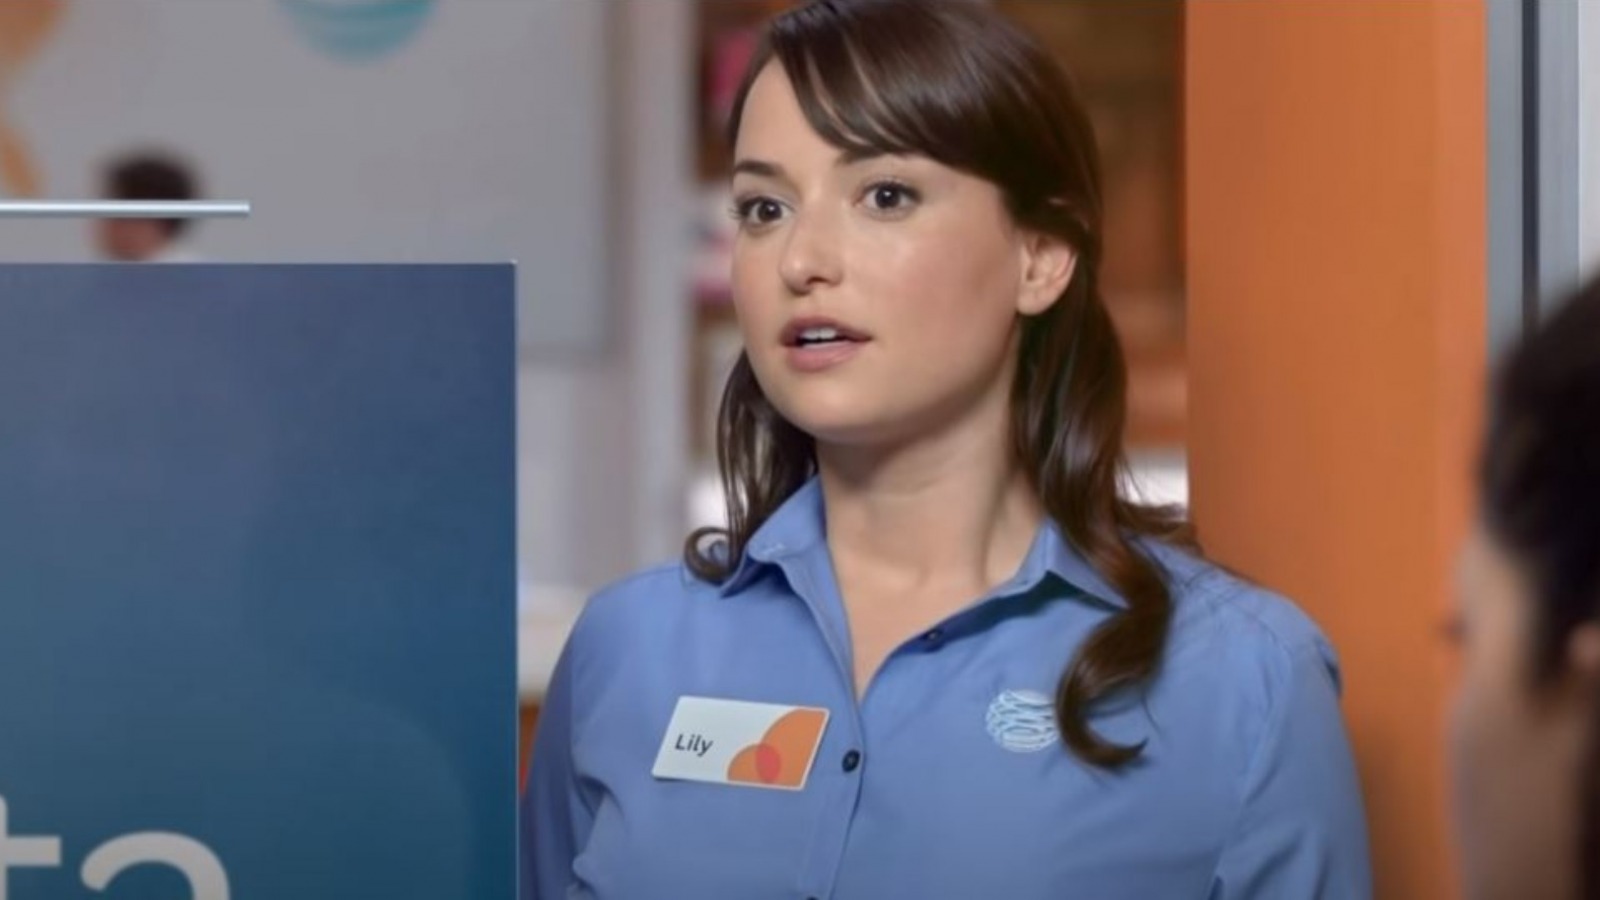 channie bell recommends Hot Chick In At&t Commercial